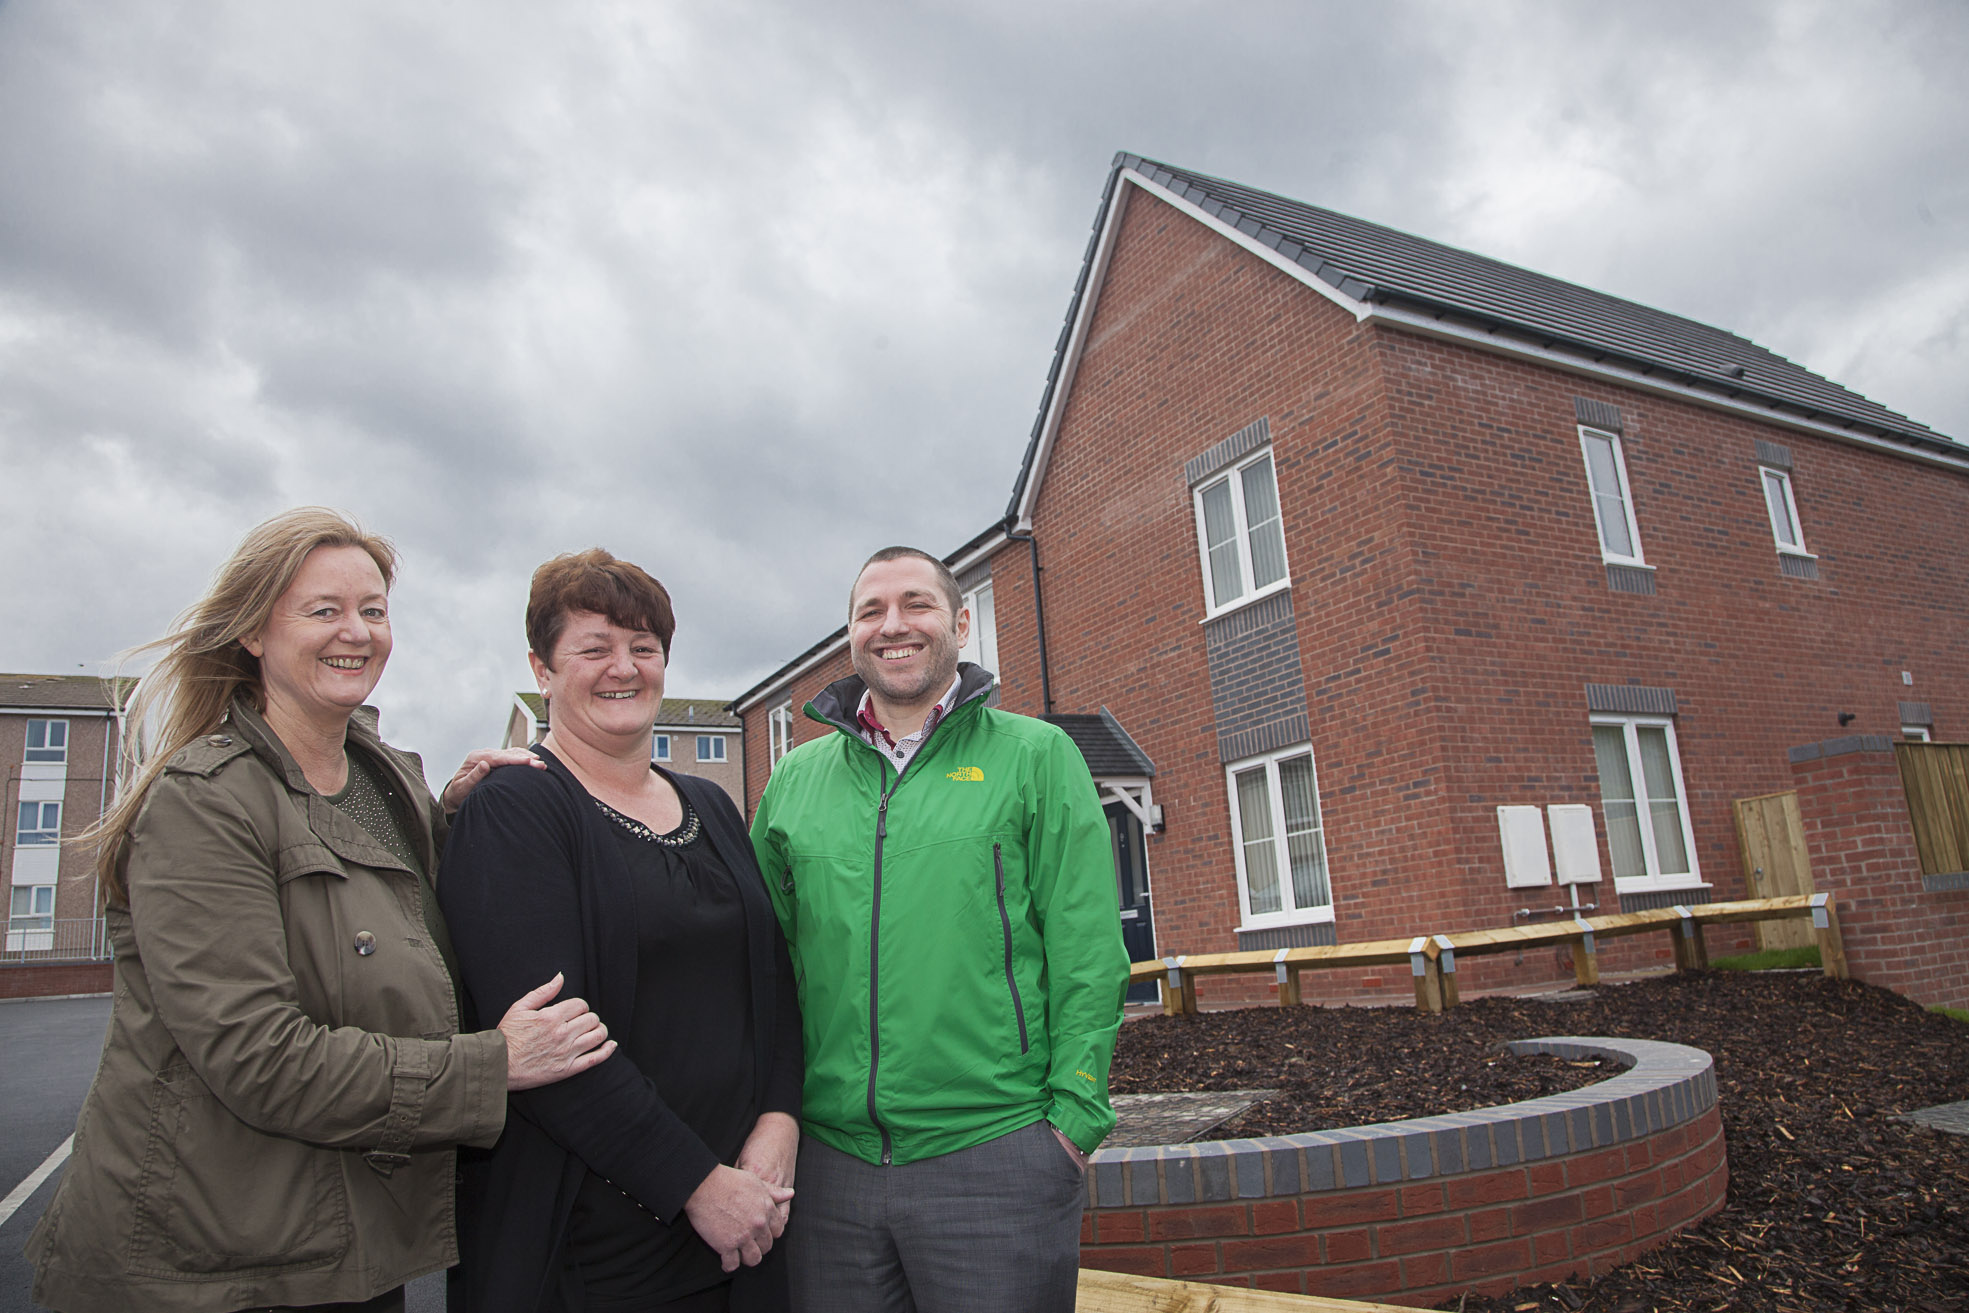 Tears of joy for Sonya after downsizing to new home